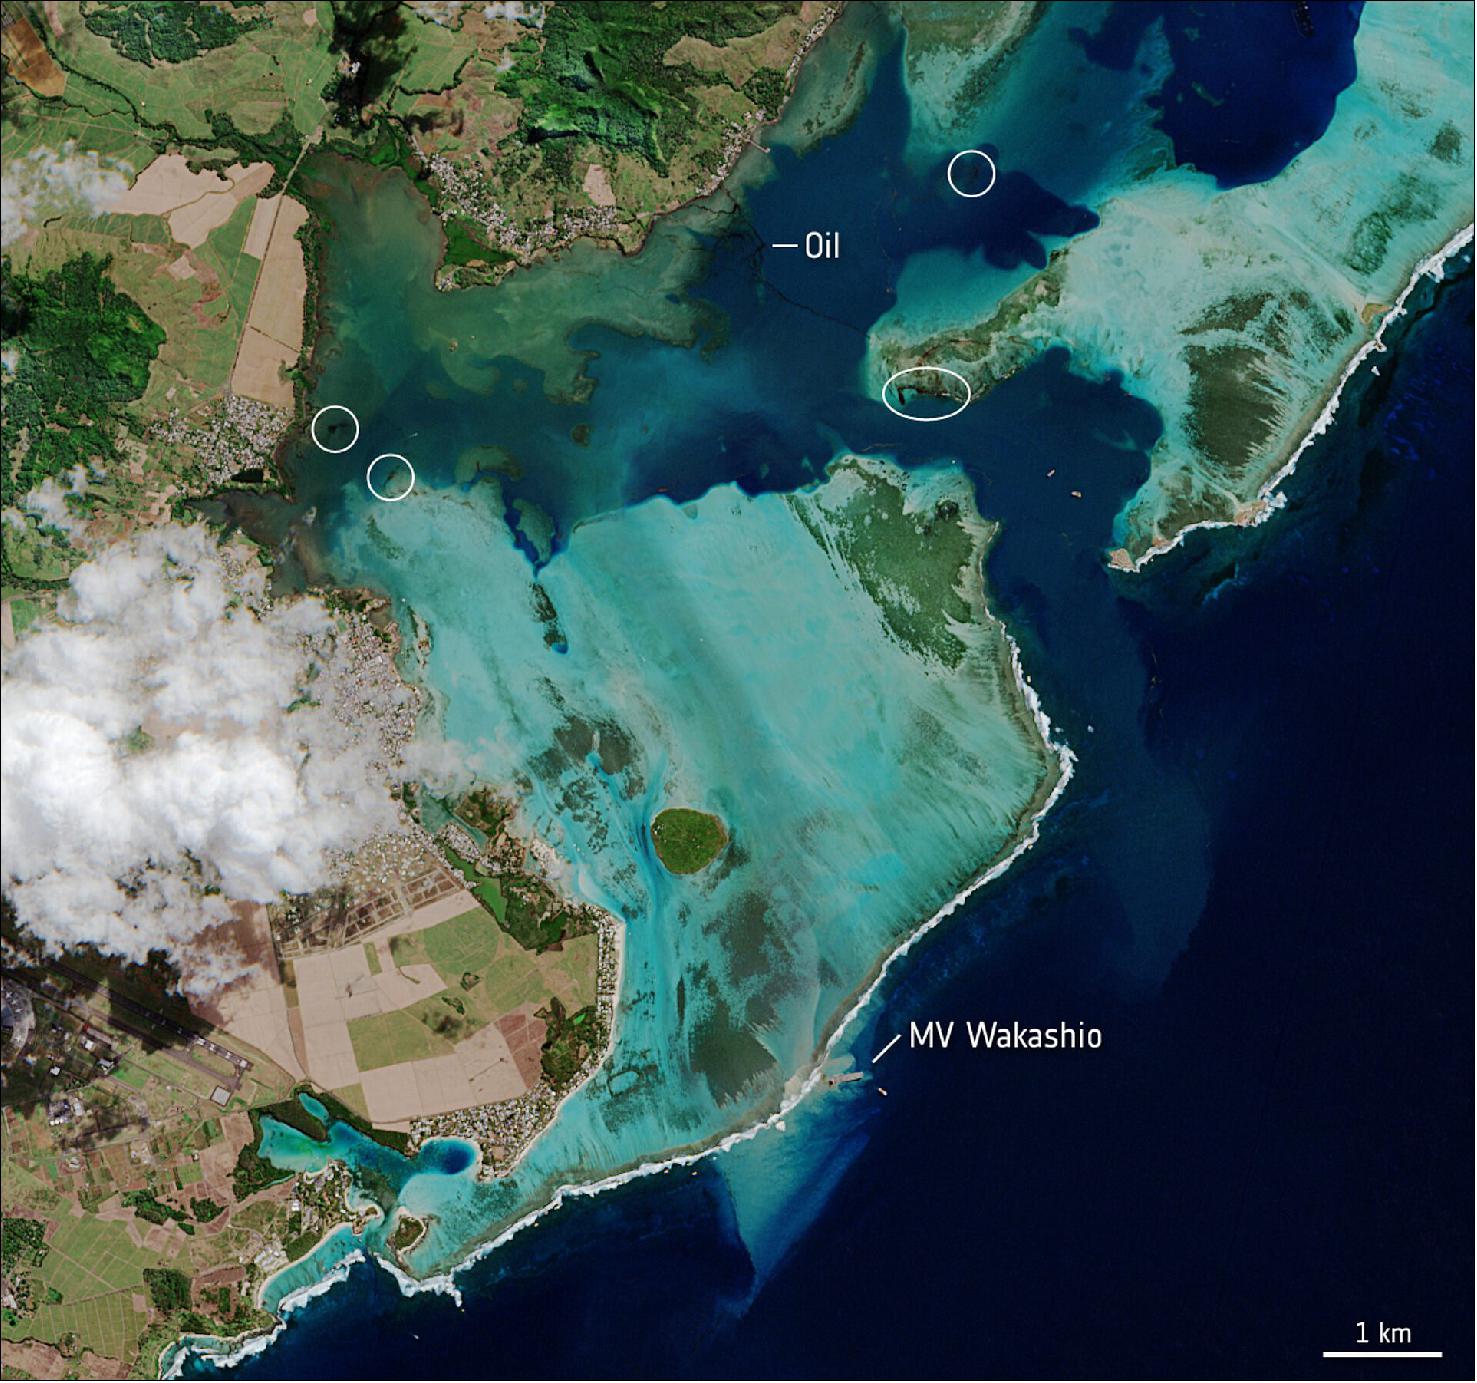 Figure 19: In this image, captured on 11 August by the Copernicus Sentinel-2 mission, the MV Wakashio, visible in the bottom of the image, is stranded close to Pointe d’Esny, an important wetland area. The oil slick can be seen as a thin, black line surrounded by the bright turquoise colors of the Indian Ocean. Oil is visible near the boat, as well as other locations around the lagoon (image credit: ESA, the image contains modified Copernicus Sentinel data (2020), processed by ESA, CC BY-SA 3.0 IGO)